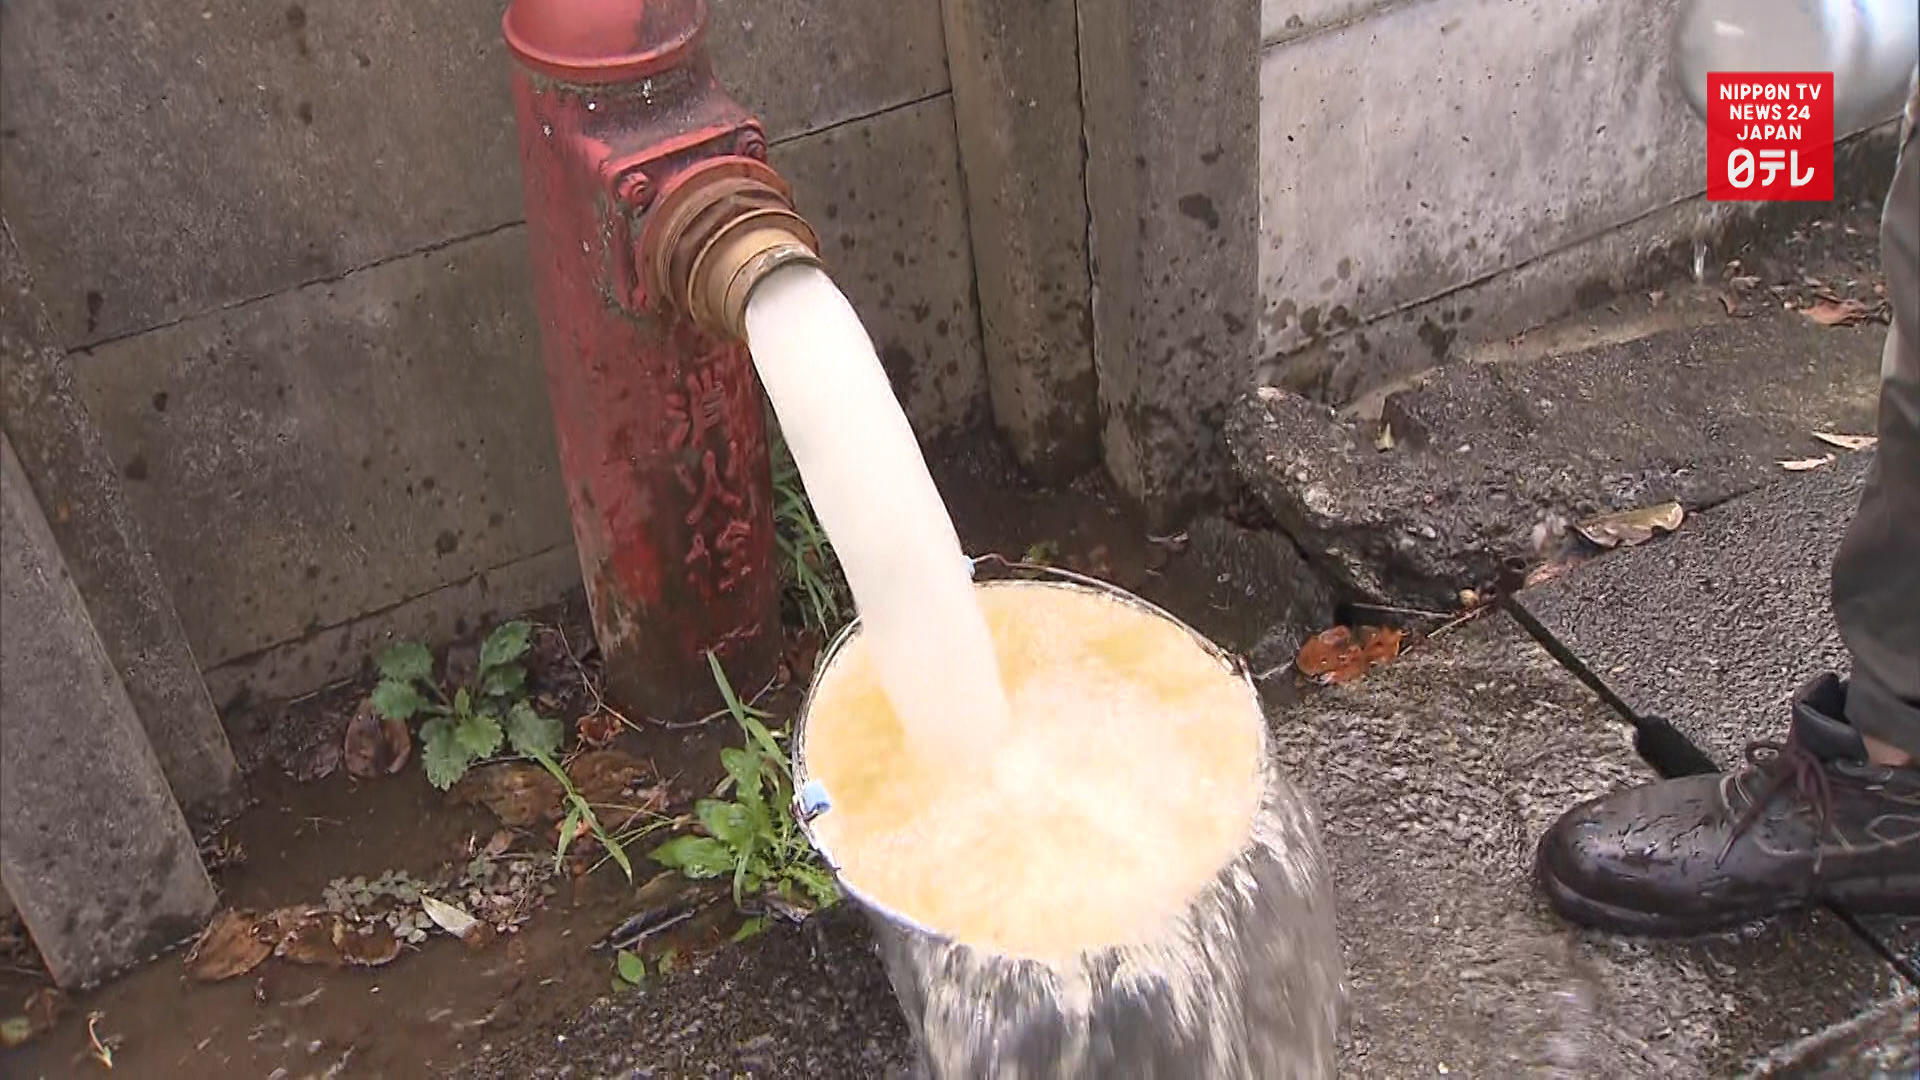 Thousands still without water in Chiba